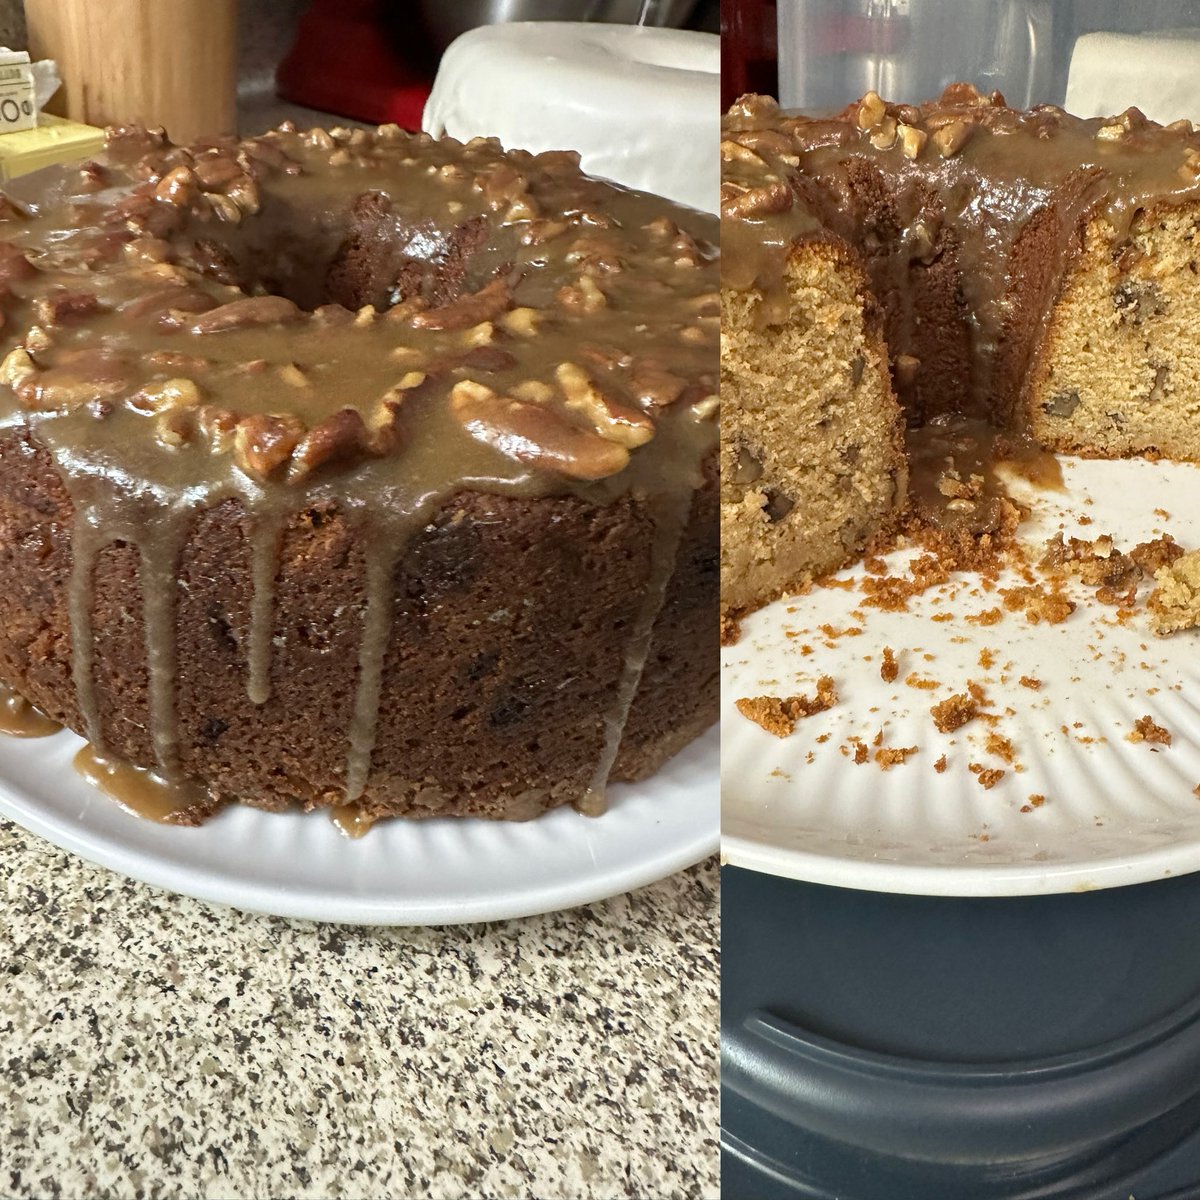 Pecan Praline buttermilk pound cake I made for the homeless yesterday. Follow my baking page on IG @imabakerbitch FB @imabakerbitsh